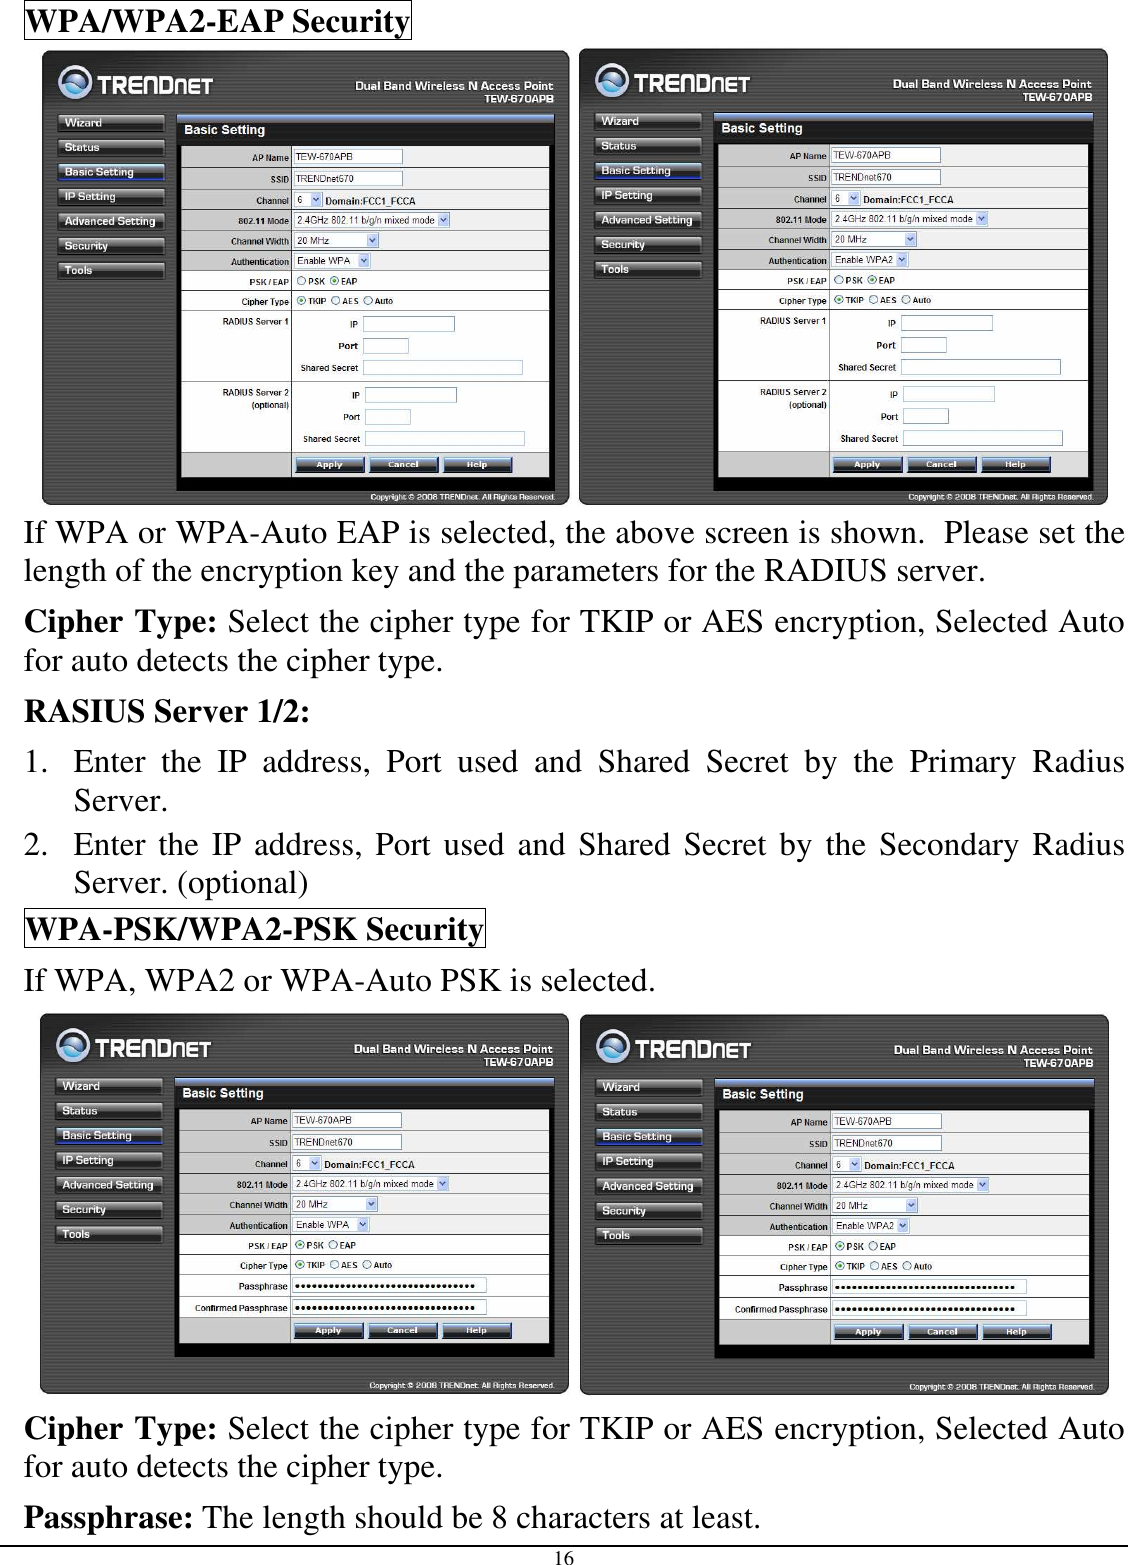  16 WPA/WPA2-EAP Security    If WPA or WPA-Auto EAP is selected, the above screen is shown.  Please set the length of the encryption key and the parameters for the RADIUS server. Cipher Type: Select the cipher type for TKIP or AES encryption, Selected Auto for auto detects the cipher type.  RASIUS Server 1/2: 1. Enter  the  IP  address,  Port  used  and  Shared  Secret  by  the  Primary  Radius Server. 2. Enter the IP address, Port used and Shared Secret by the Secondary Radius Server. (optional) WPA-PSK/WPA2-PSK Security If WPA, WPA2 or WPA-Auto PSK is selected.    Cipher Type: Select the cipher type for TKIP or AES encryption, Selected Auto for auto detects the cipher type.  Passphrase: The length should be 8 characters at least.  